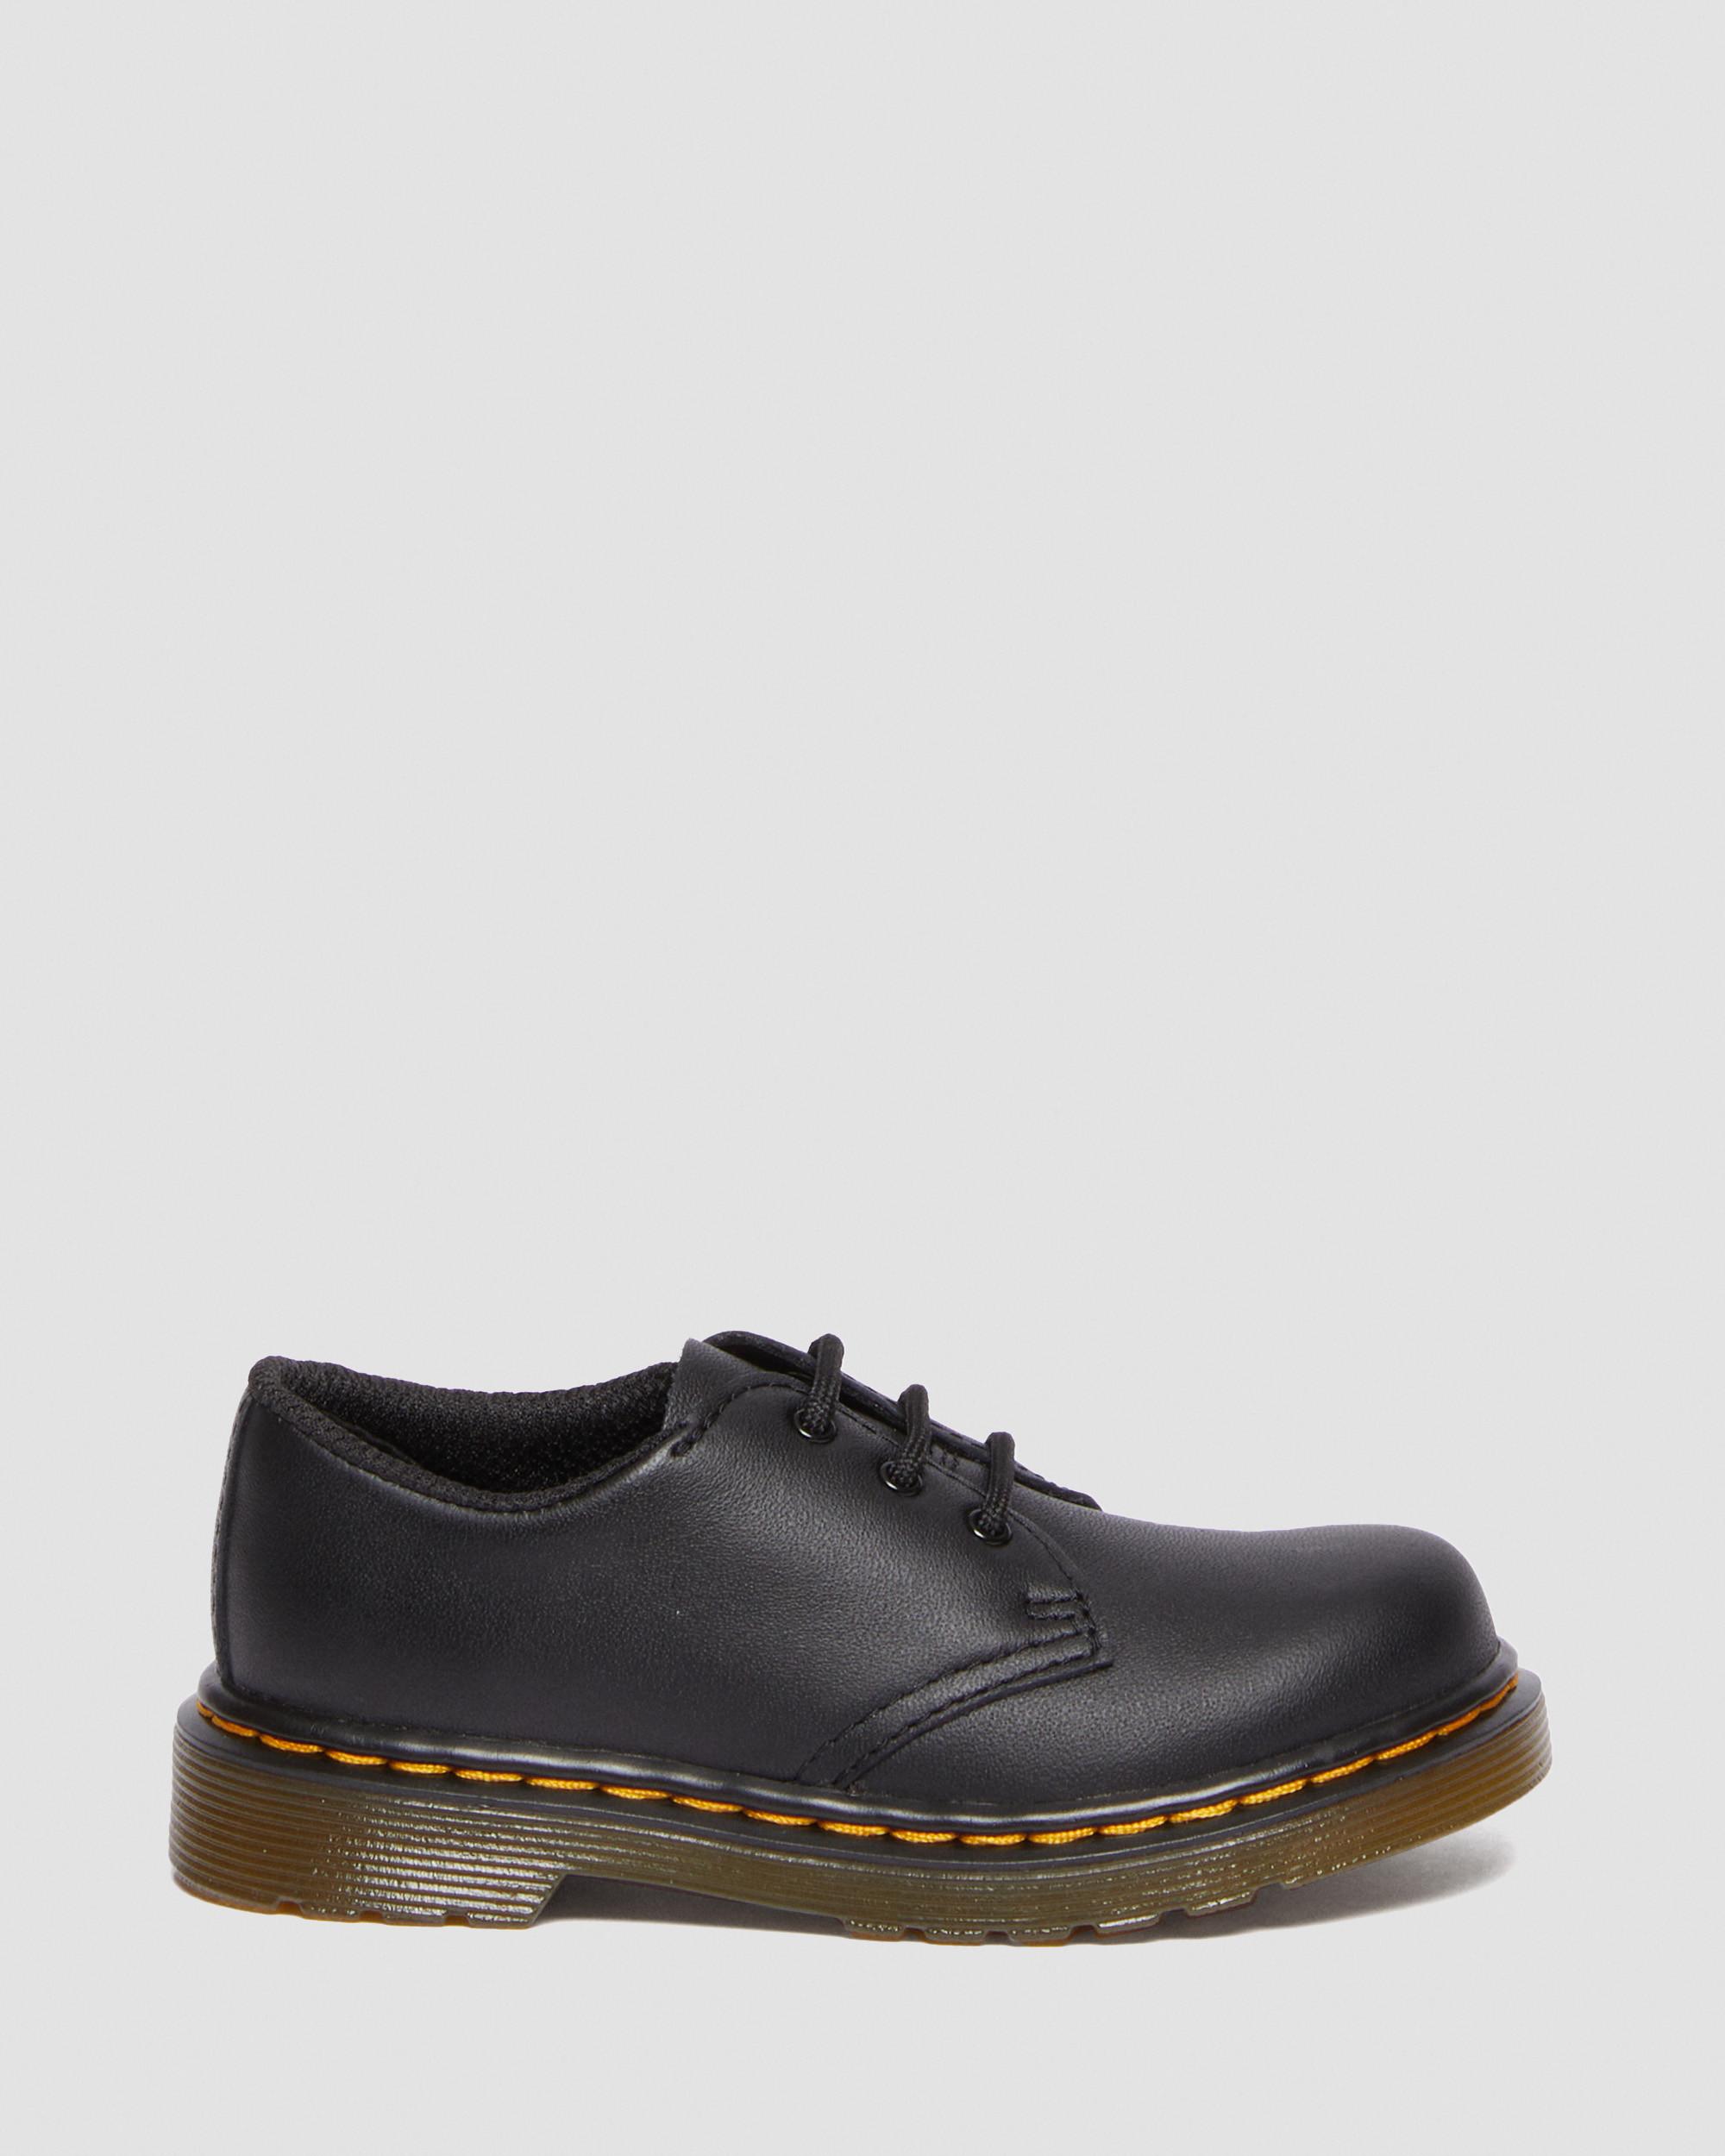 Toddler 1461 Softy T Leather Oxford Shoes in Black | Dr. Martens